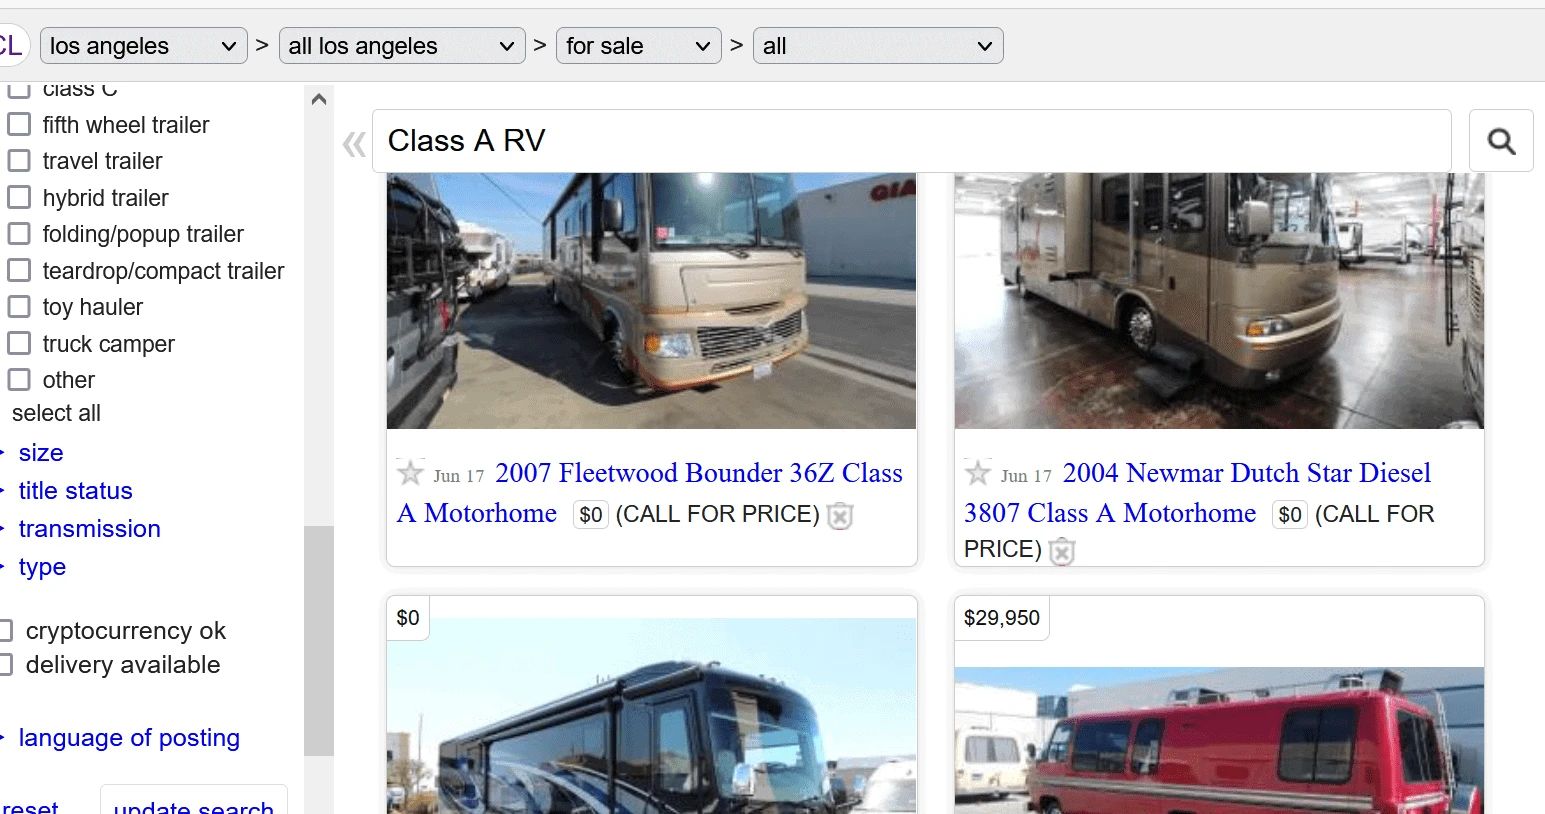 Craigslist search for used Class A RVs